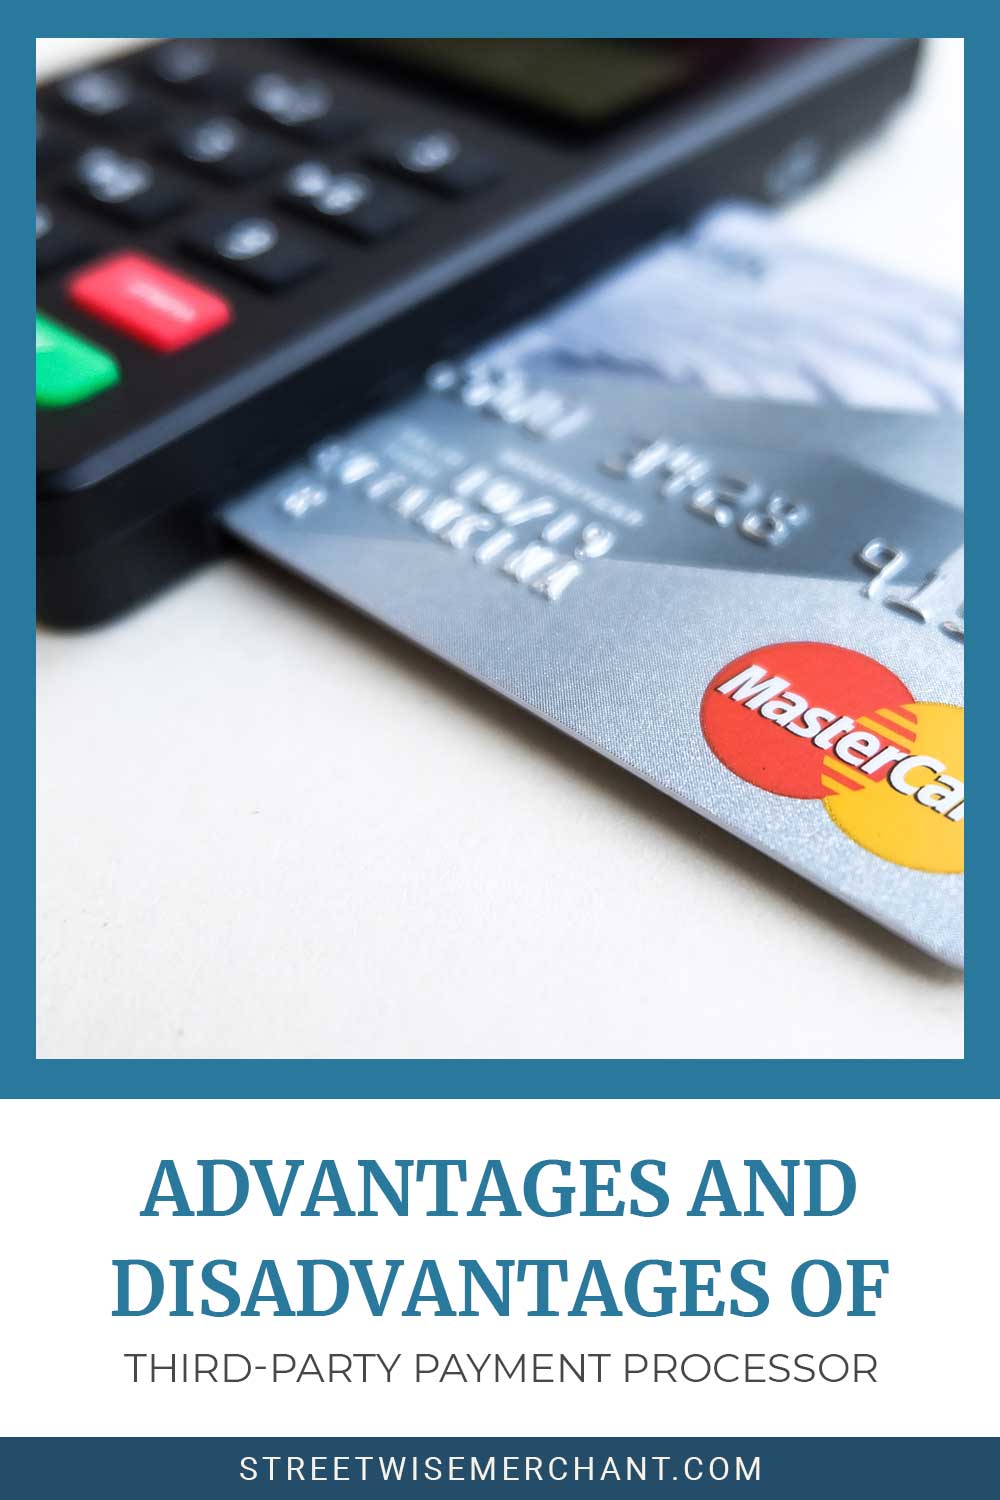 Advantages and Disadvantages of Third-Party Payment Processor